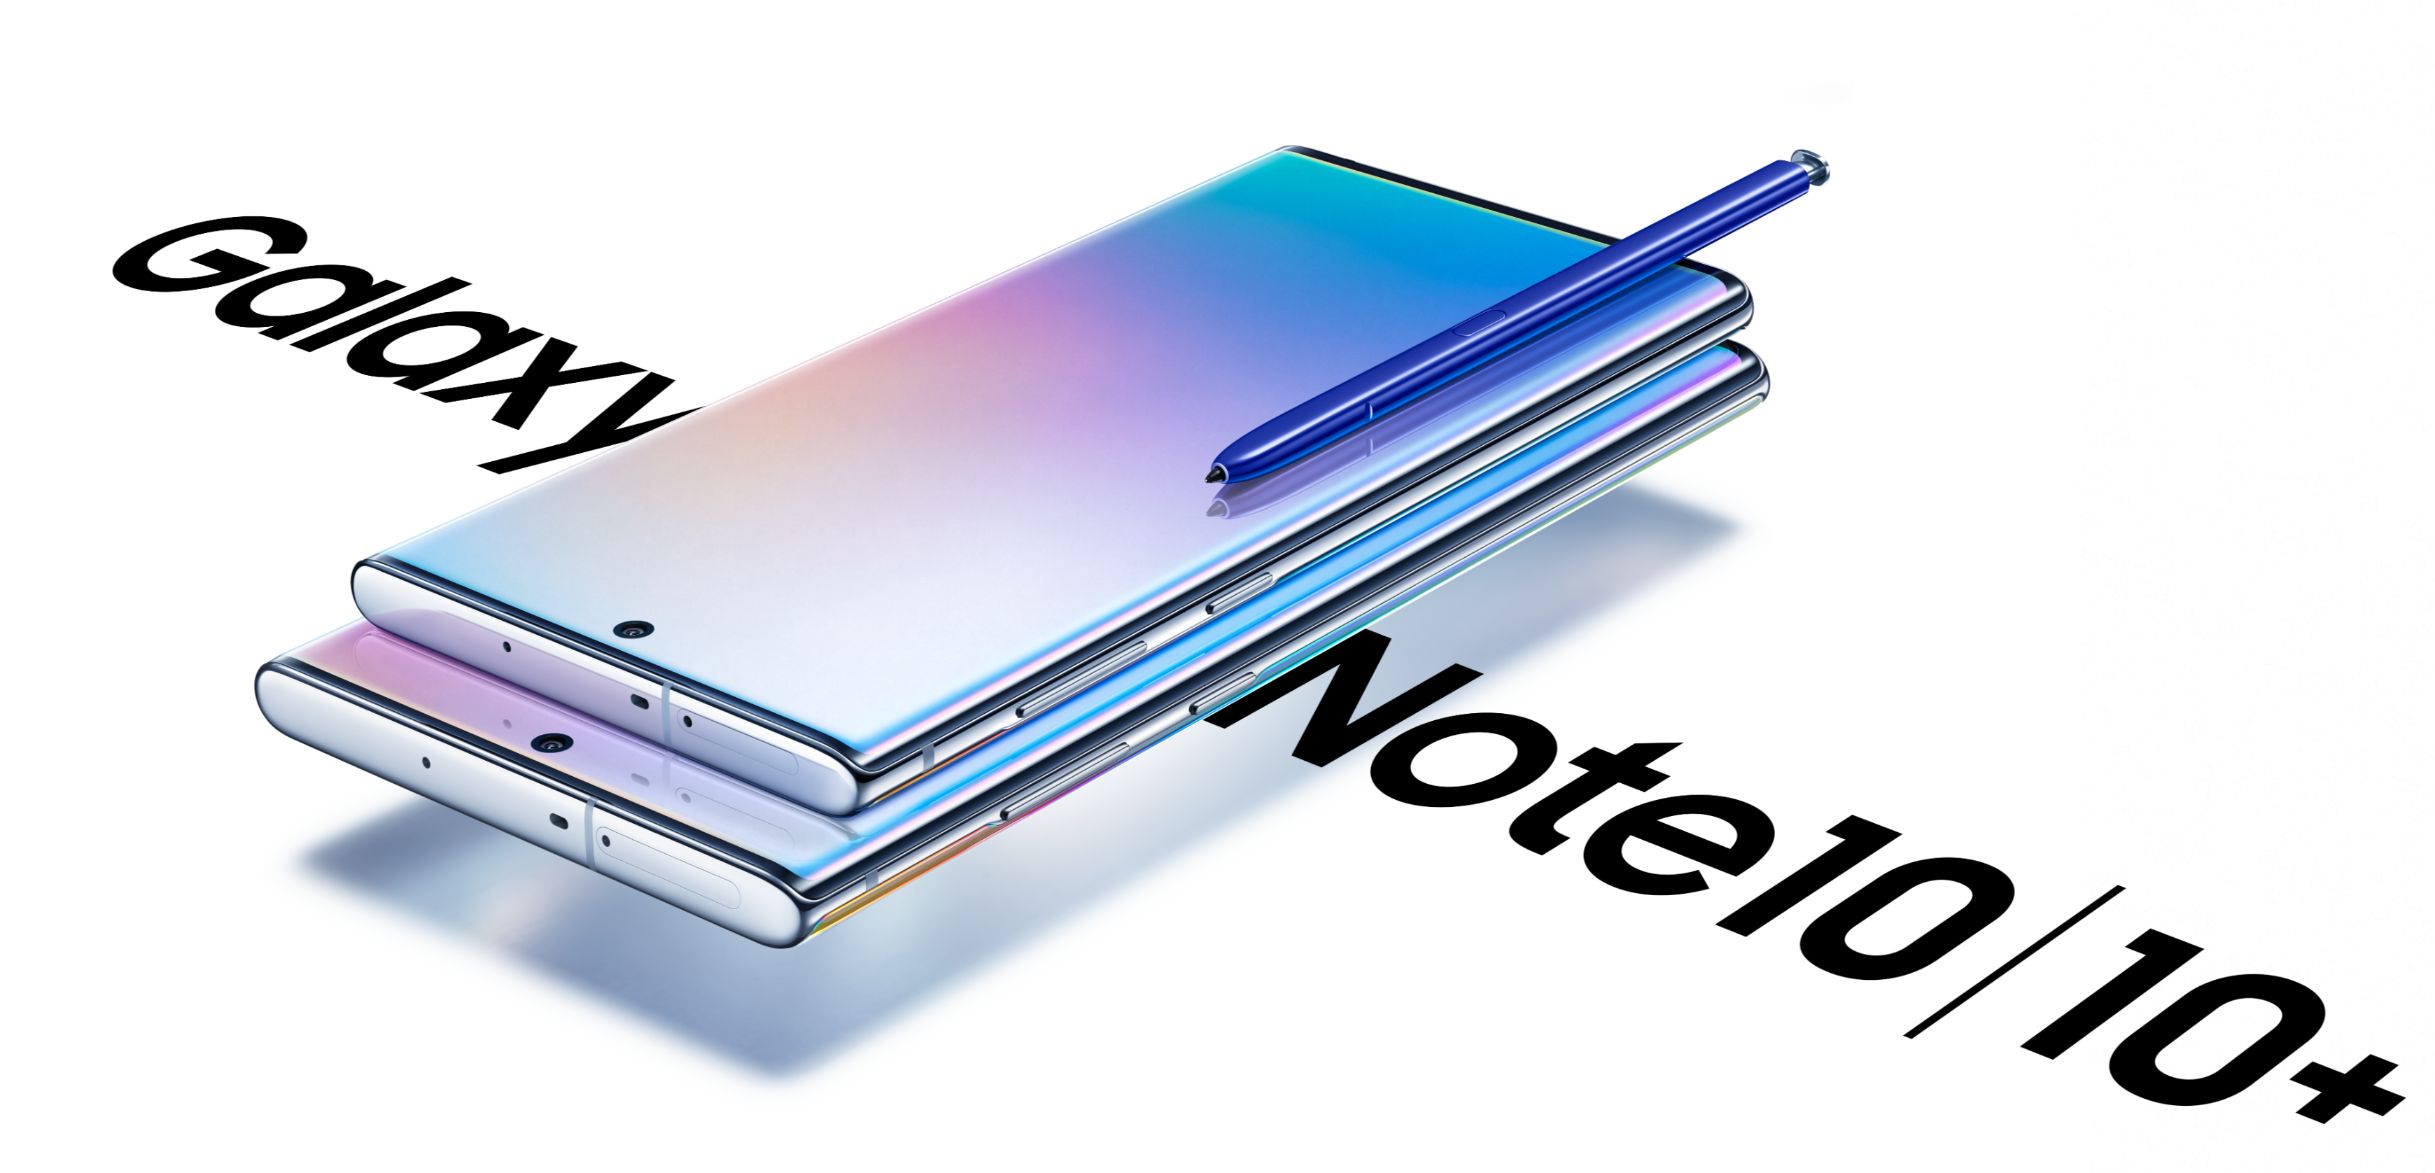 Galaxy Note & Note Plus Price in Nepal, Pre-order now